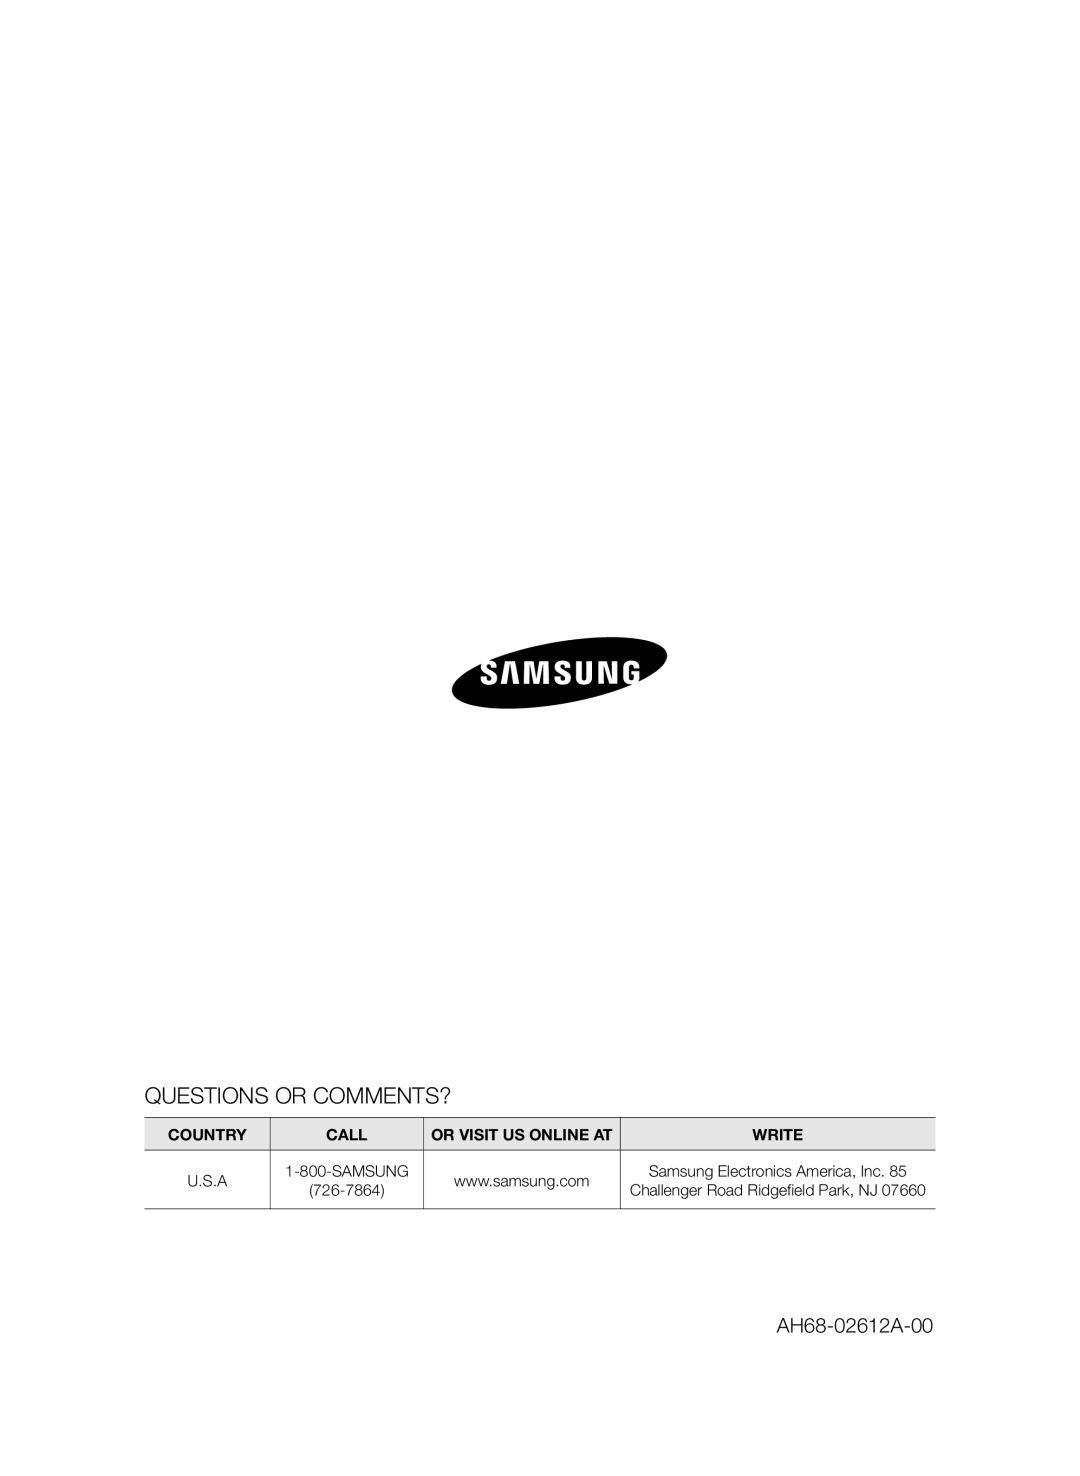 Samsung MXFS9000ZA Questions Or Comments?, AH68-02612A-00, Country, Call, Or Visit Us Online At, Write, 726-7864, U.S.A 